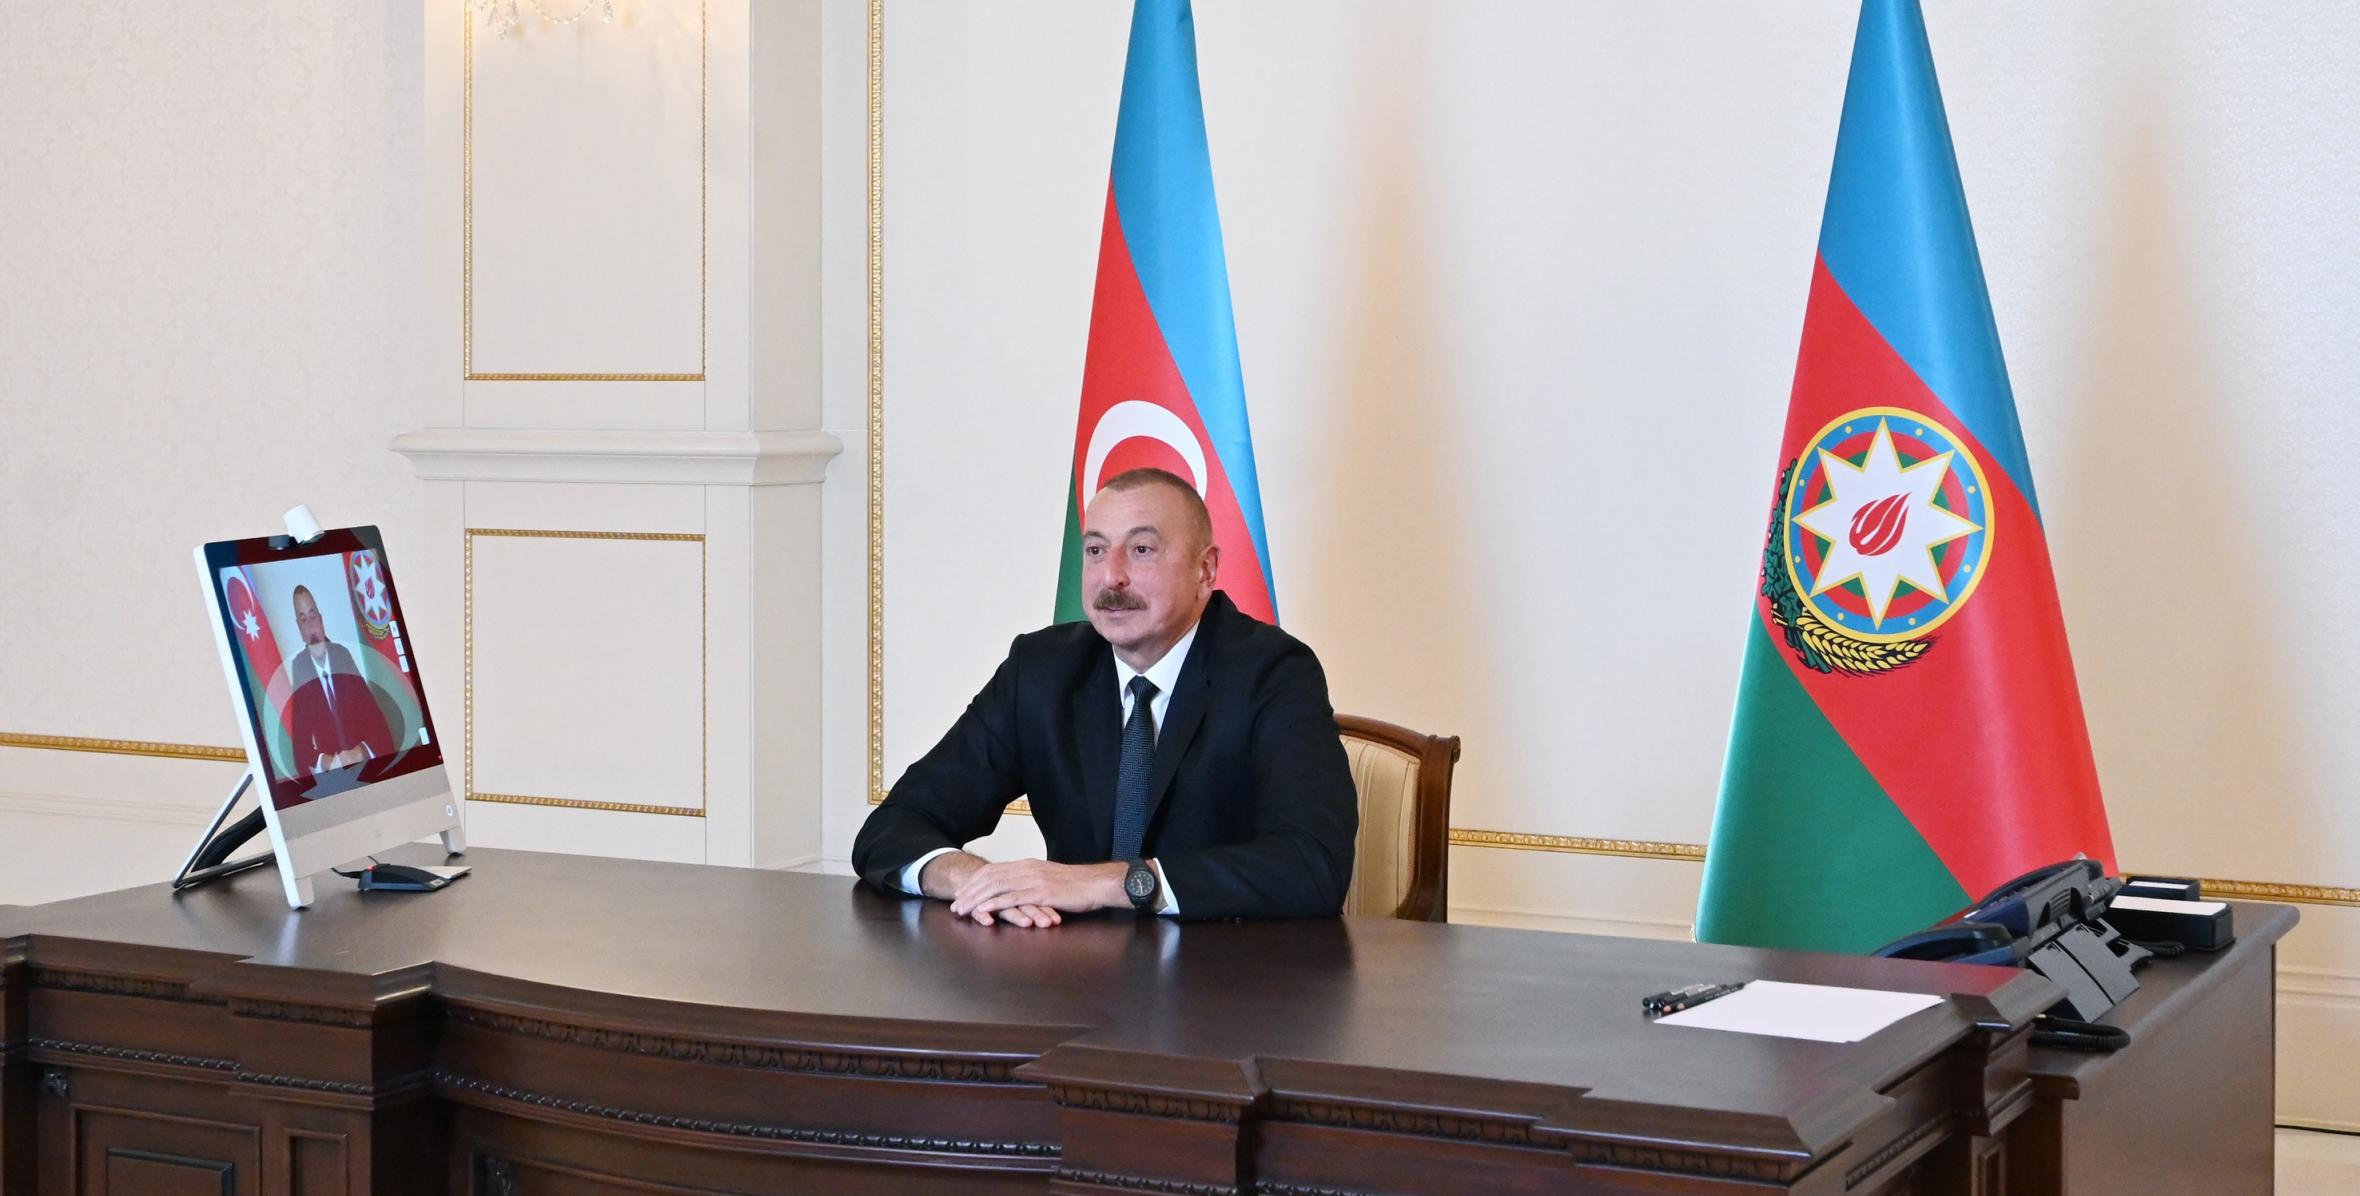 CNN International TV channel’s “The Connect World” program broadcast interview with President Ilham Aliyev